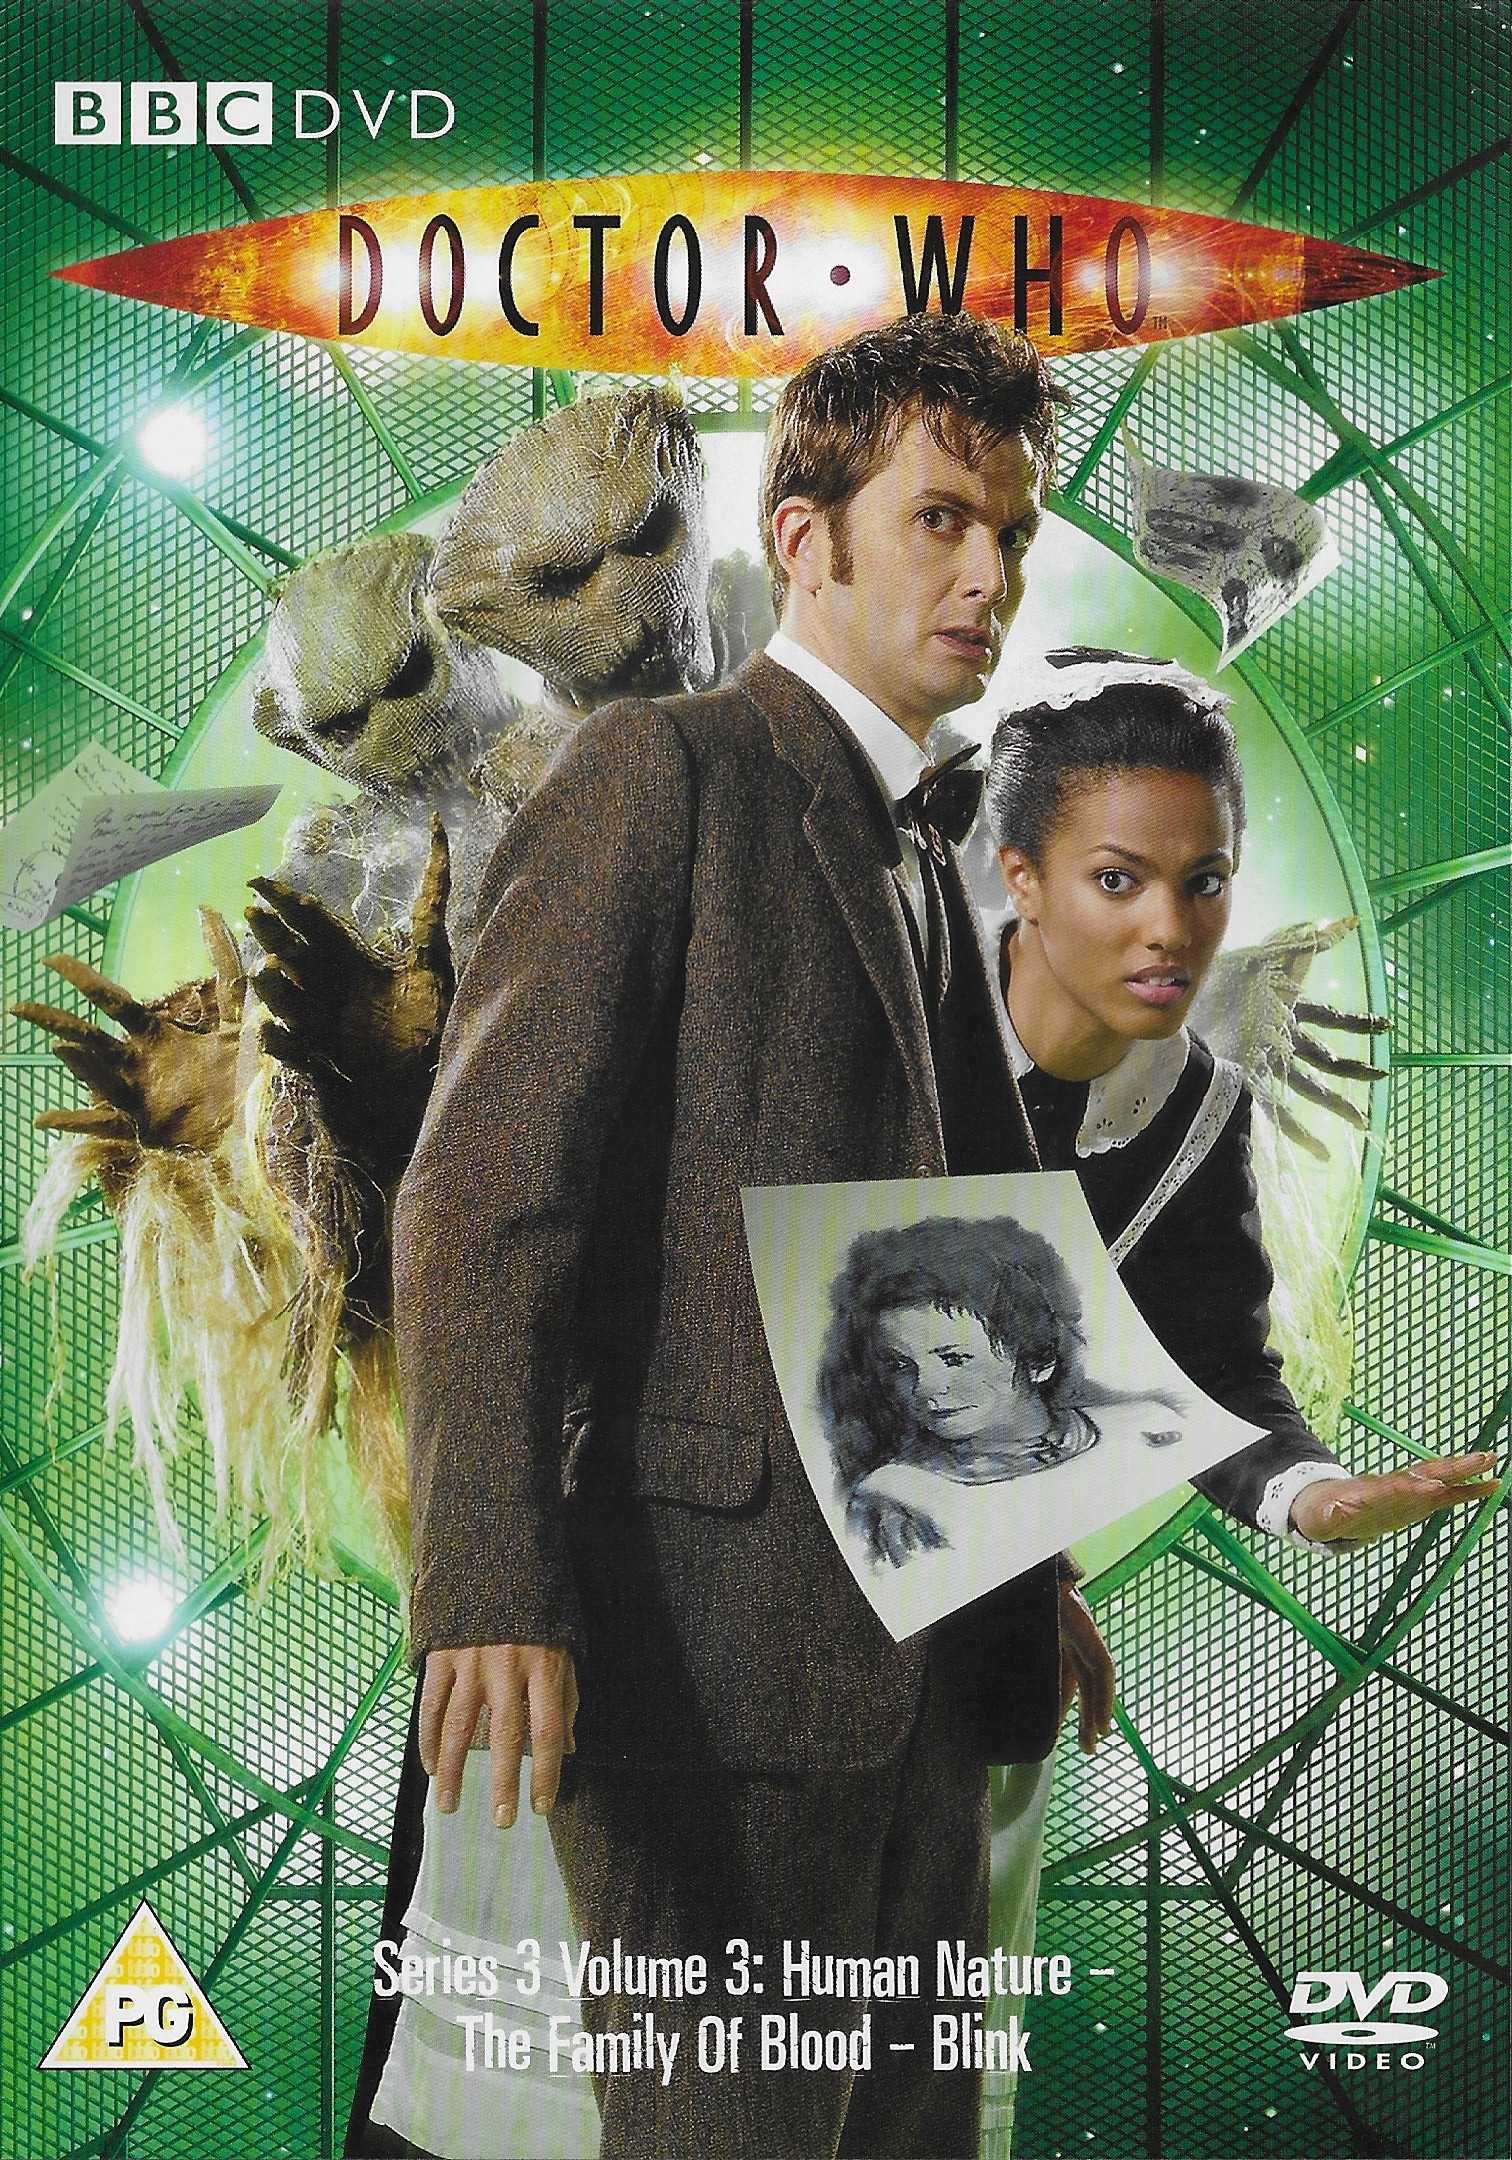 Picture of BBCDVD 2383 Doctor Who - Series 3, volume 3 by artist Paul Cornell / Steven Moffat from the BBC dvds - Records and Tapes library